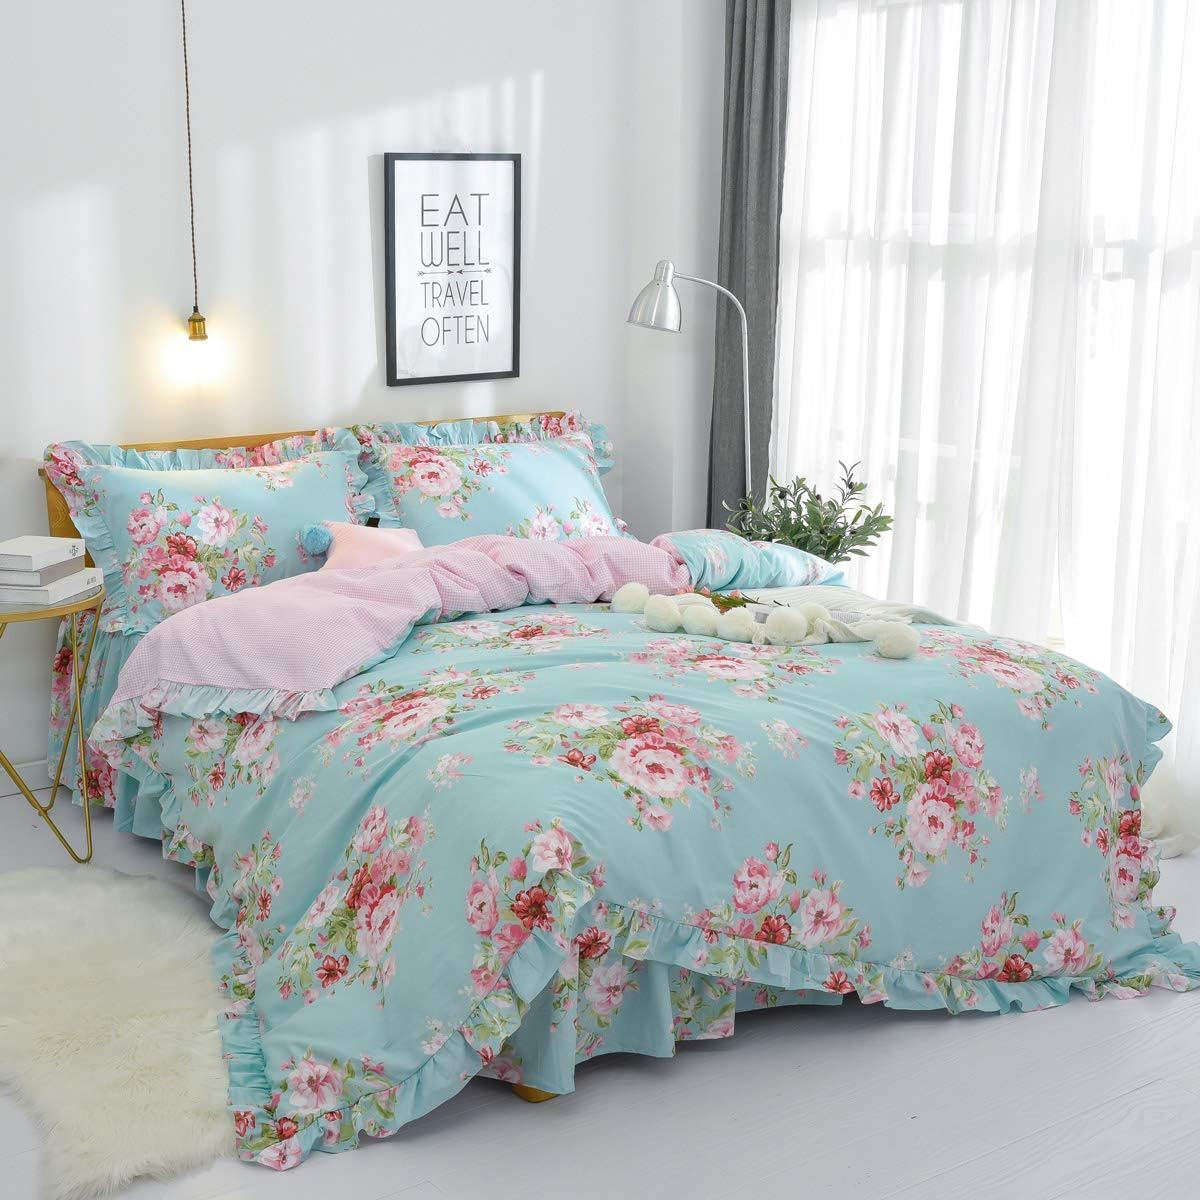 FADFAY 4-Piece Twin Size Dorm Bedding Floral Bed Set for Girls 100% Cotton Ruffled Duvet Cover Set Soft Breathable Skin-Friendly Bed Skirt Sets Garden Style All-Season Use